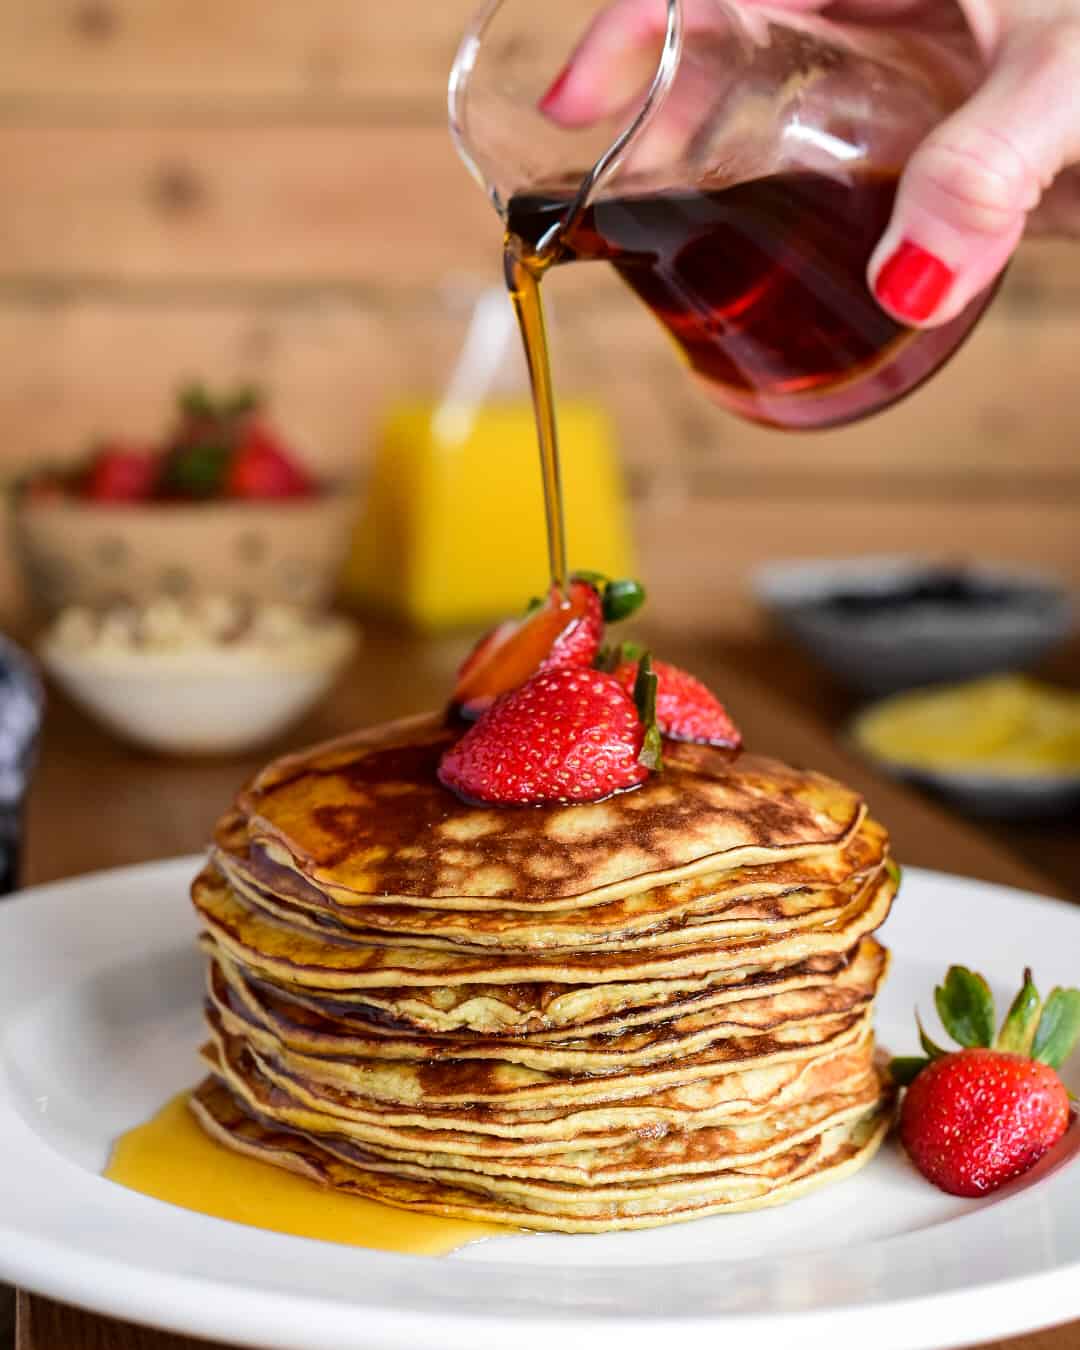 Two Ingredient Banana Pancakes - stack with strawberries and a stream of pouring syrup.